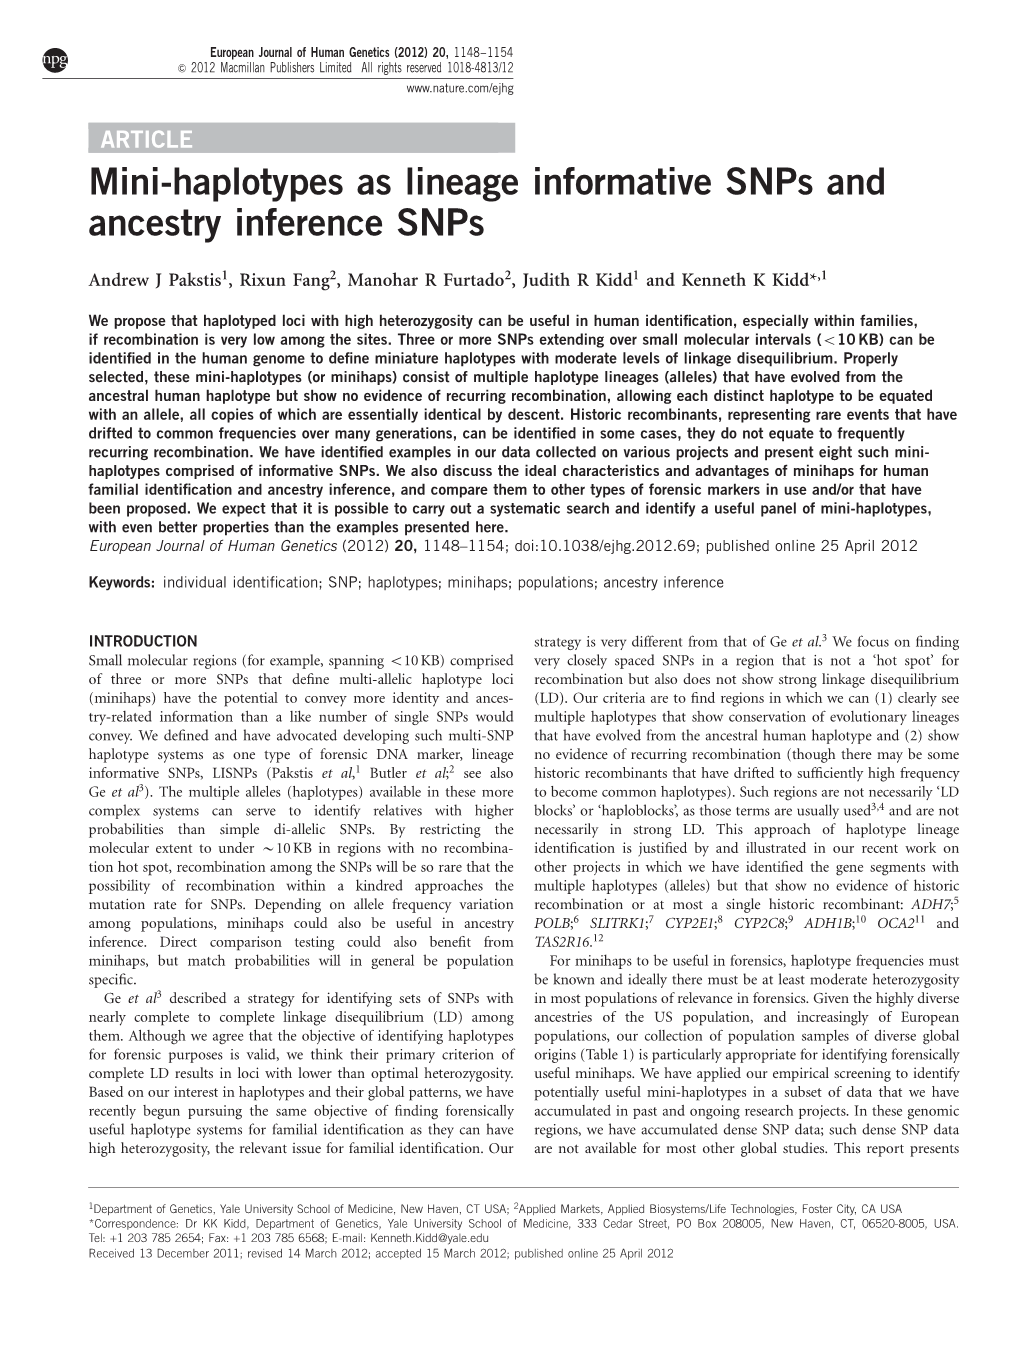 Mini-Haplotypes As Lineage Informative Snps and Ancestry Inference Snps